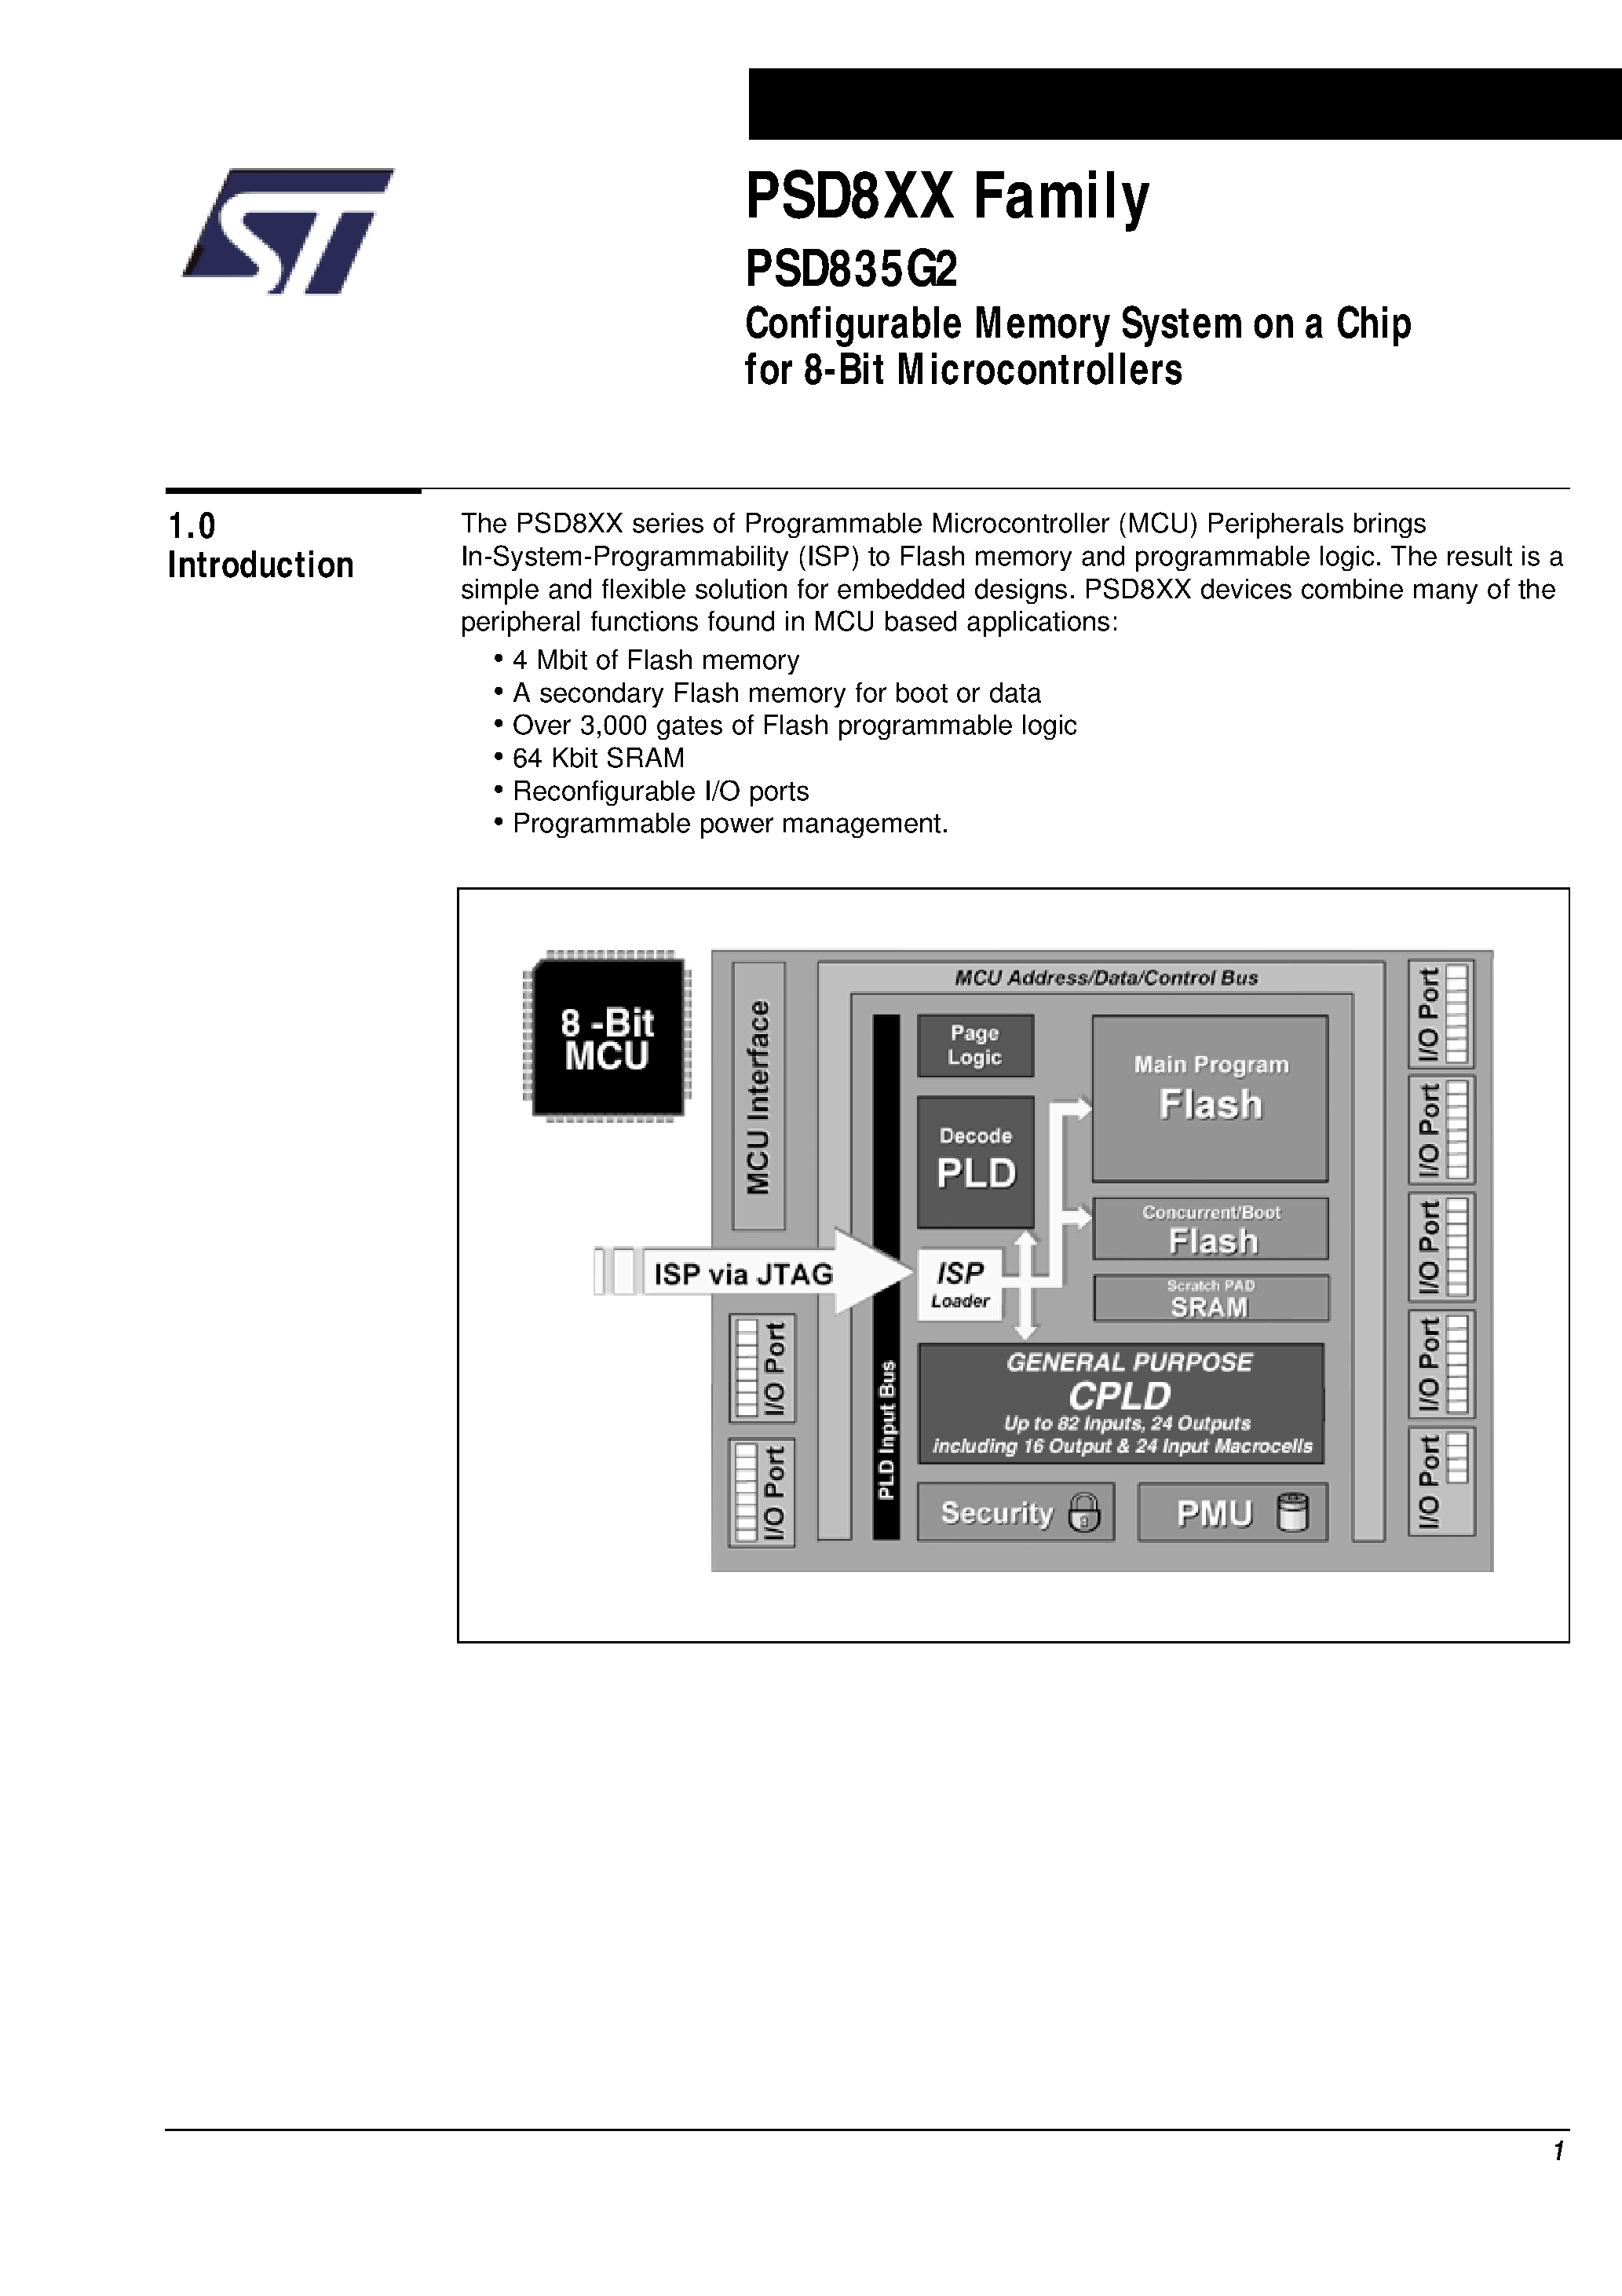 Datasheet PSD835F3-A-12B81I - Configurable Memory System on a Chip for 8-Bit Microcontrollers page 2